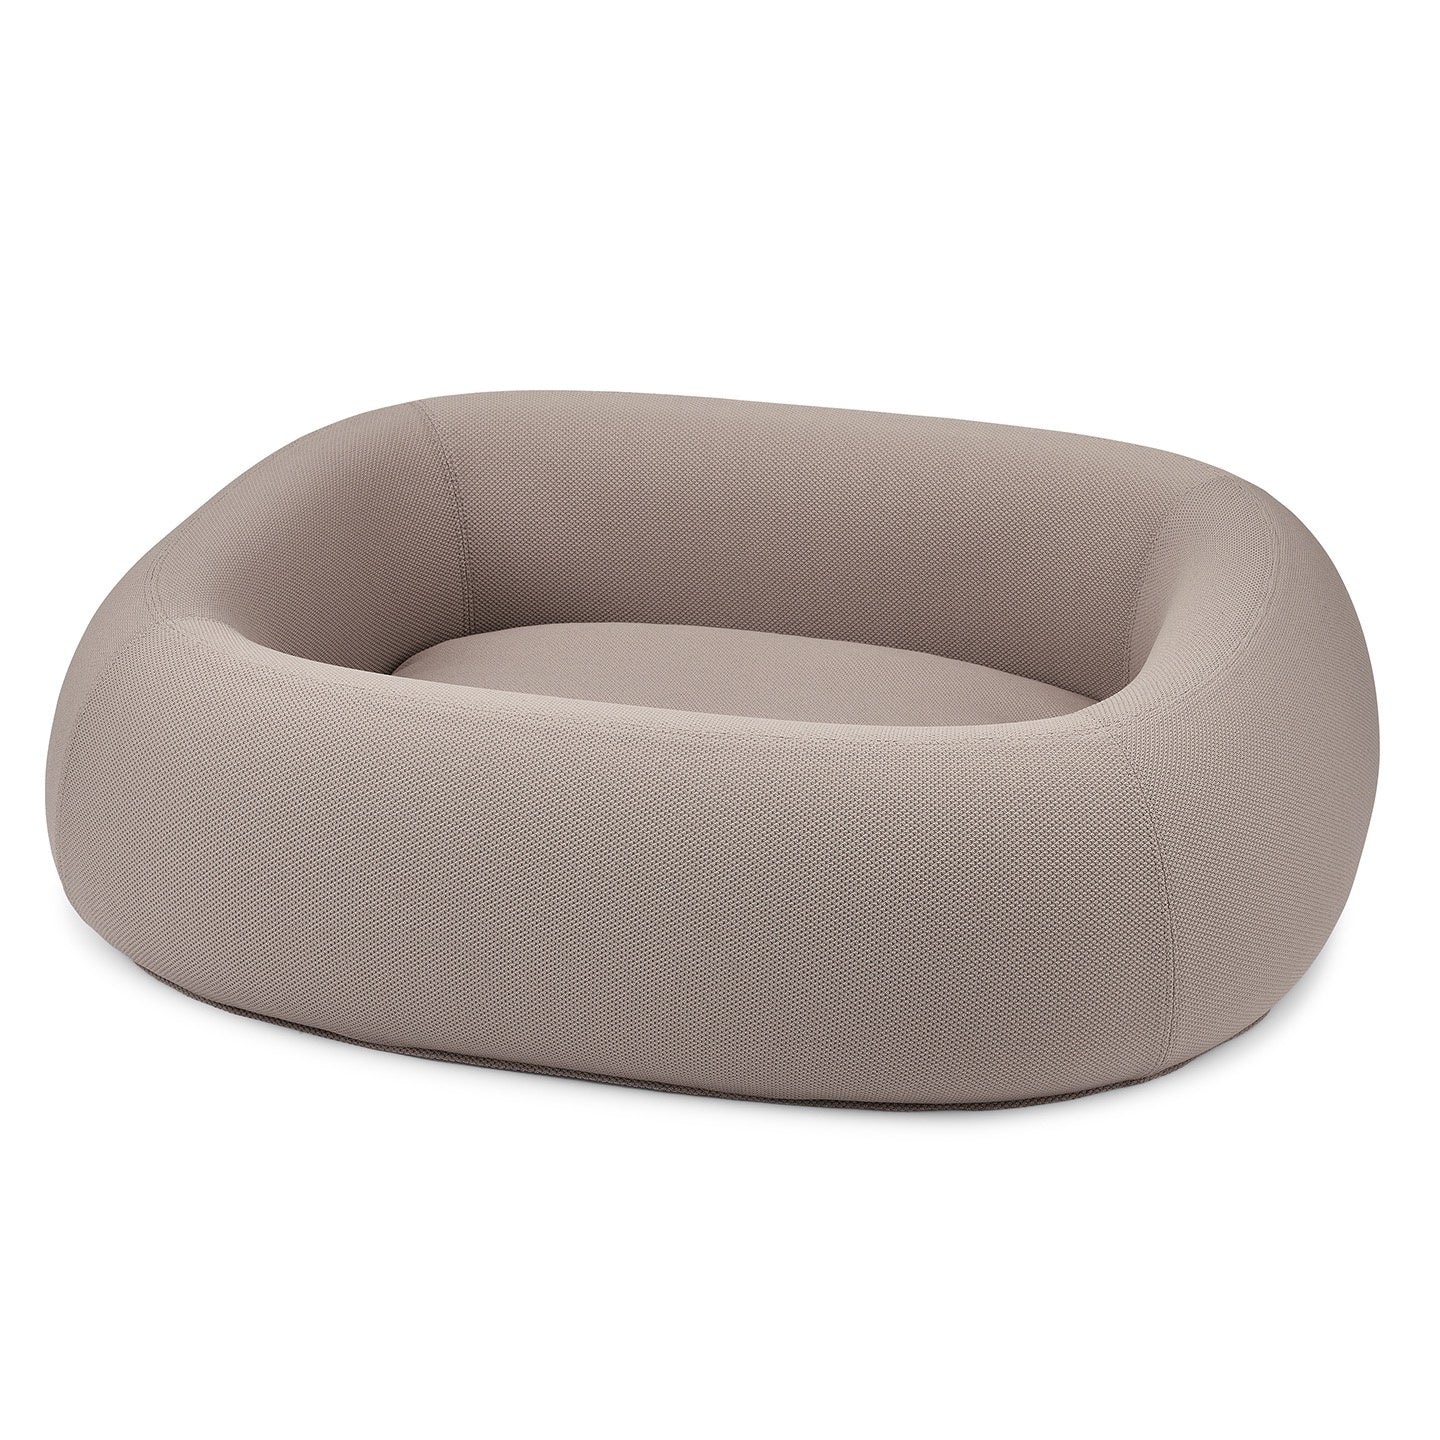 Barca Bed - Taupe